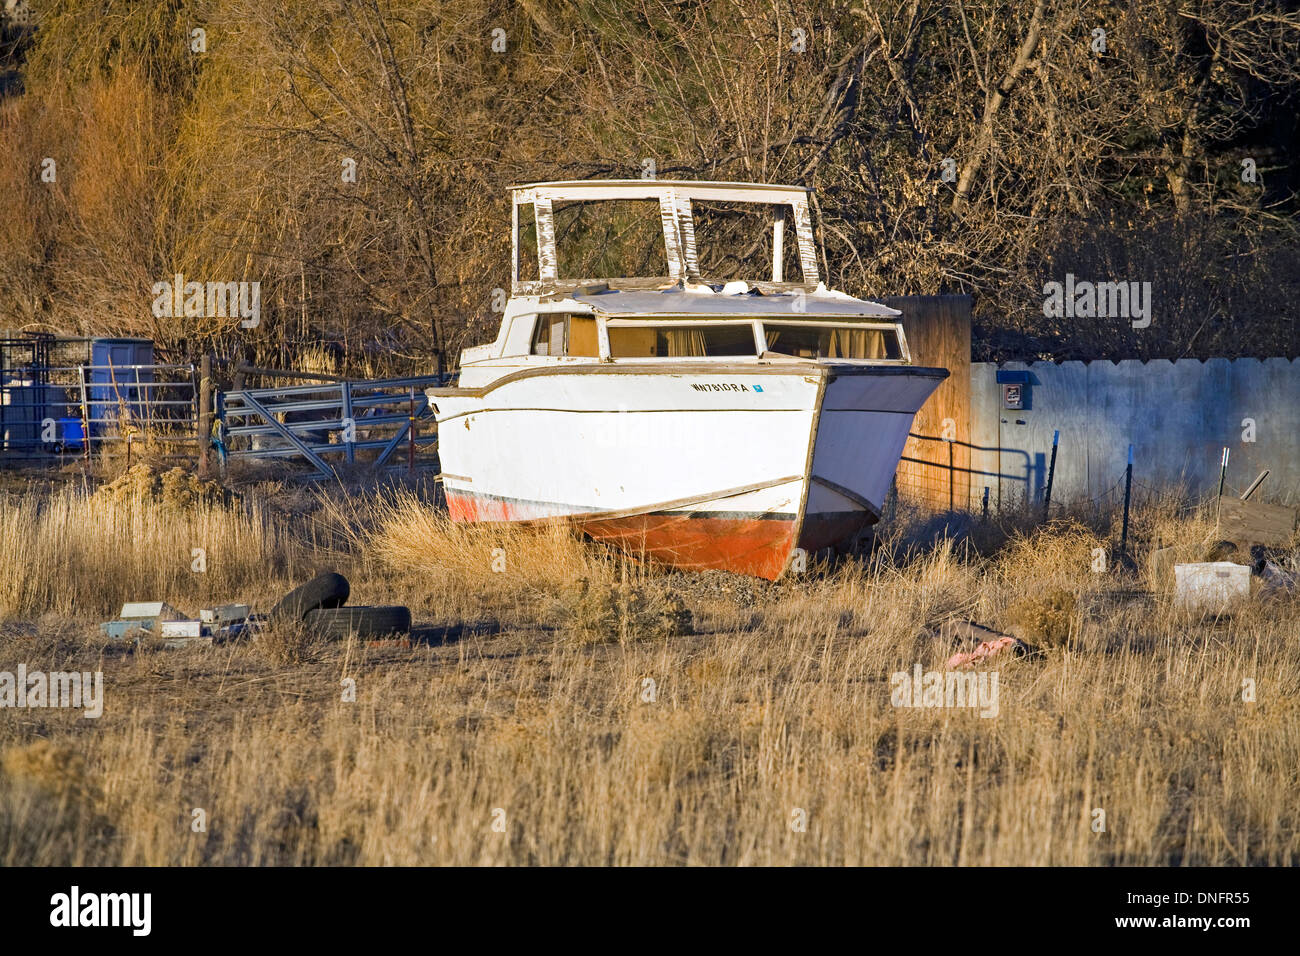 A badly neglected yacht sits in a field in central Oregon. Stock Photo